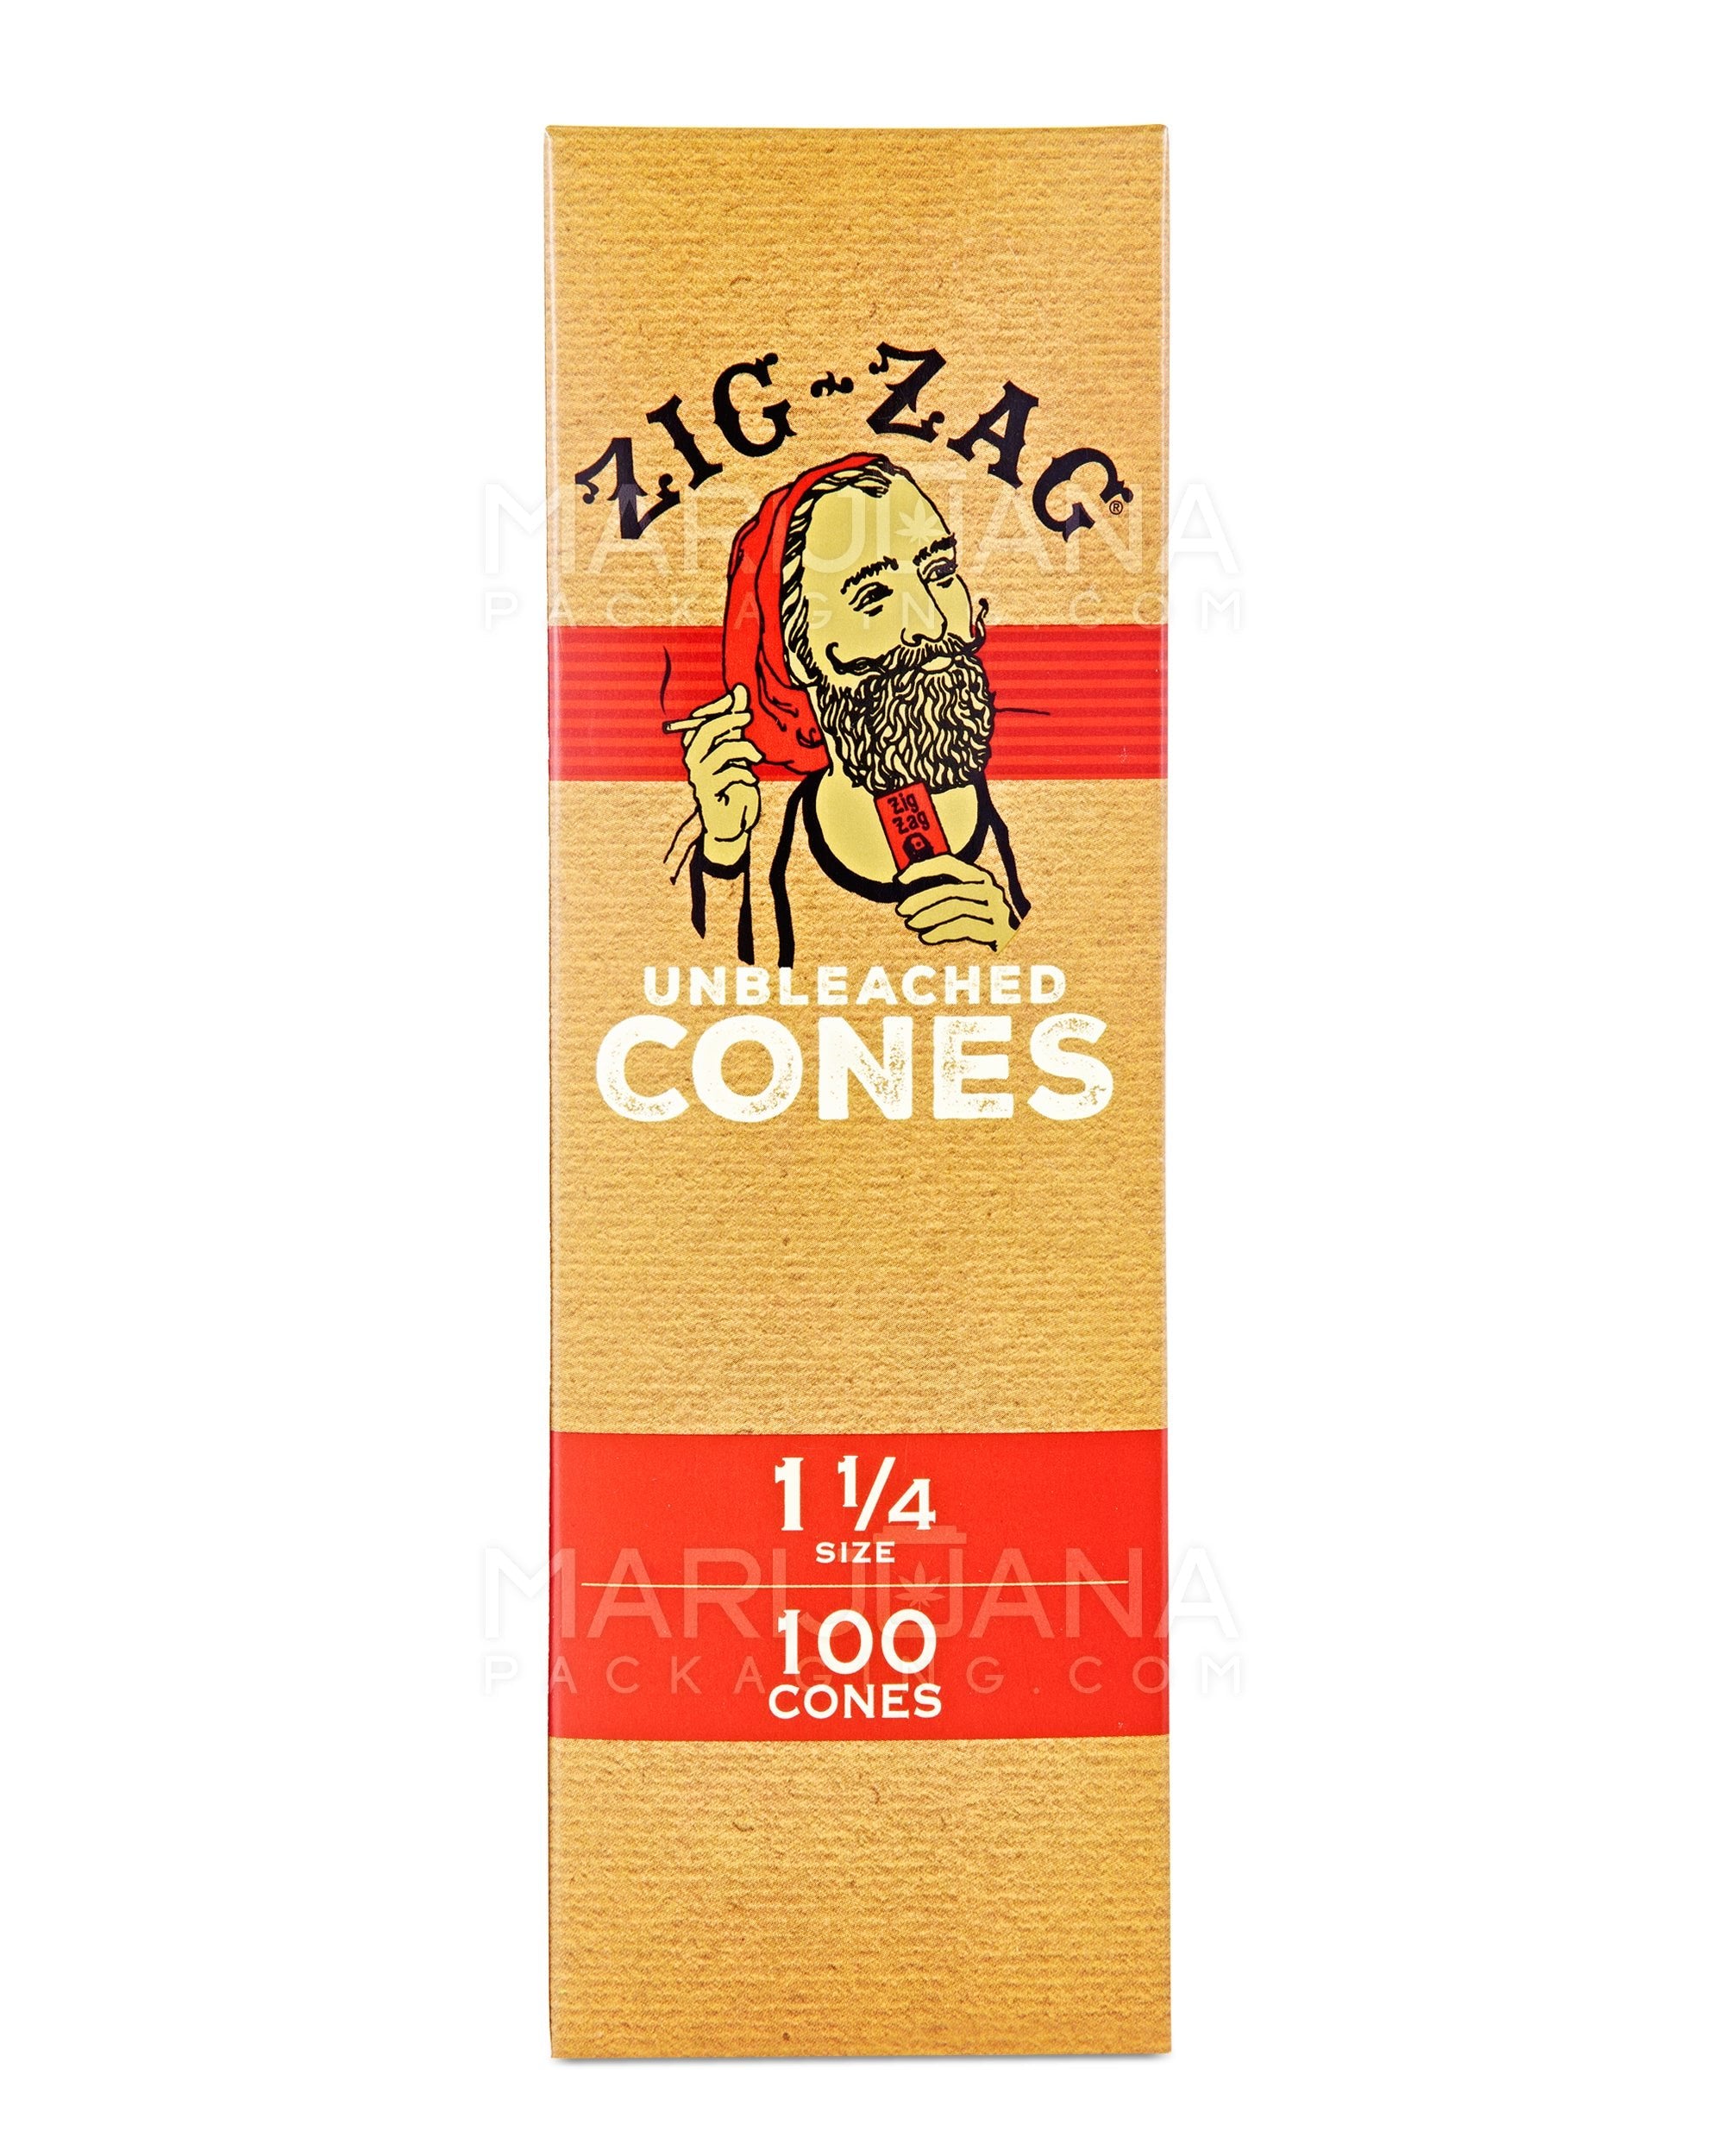 ZIG ZAG | 1 1/4 Size Pre-Rolled Cones | 84mm - Unbleached Paper - 100 Count - 4